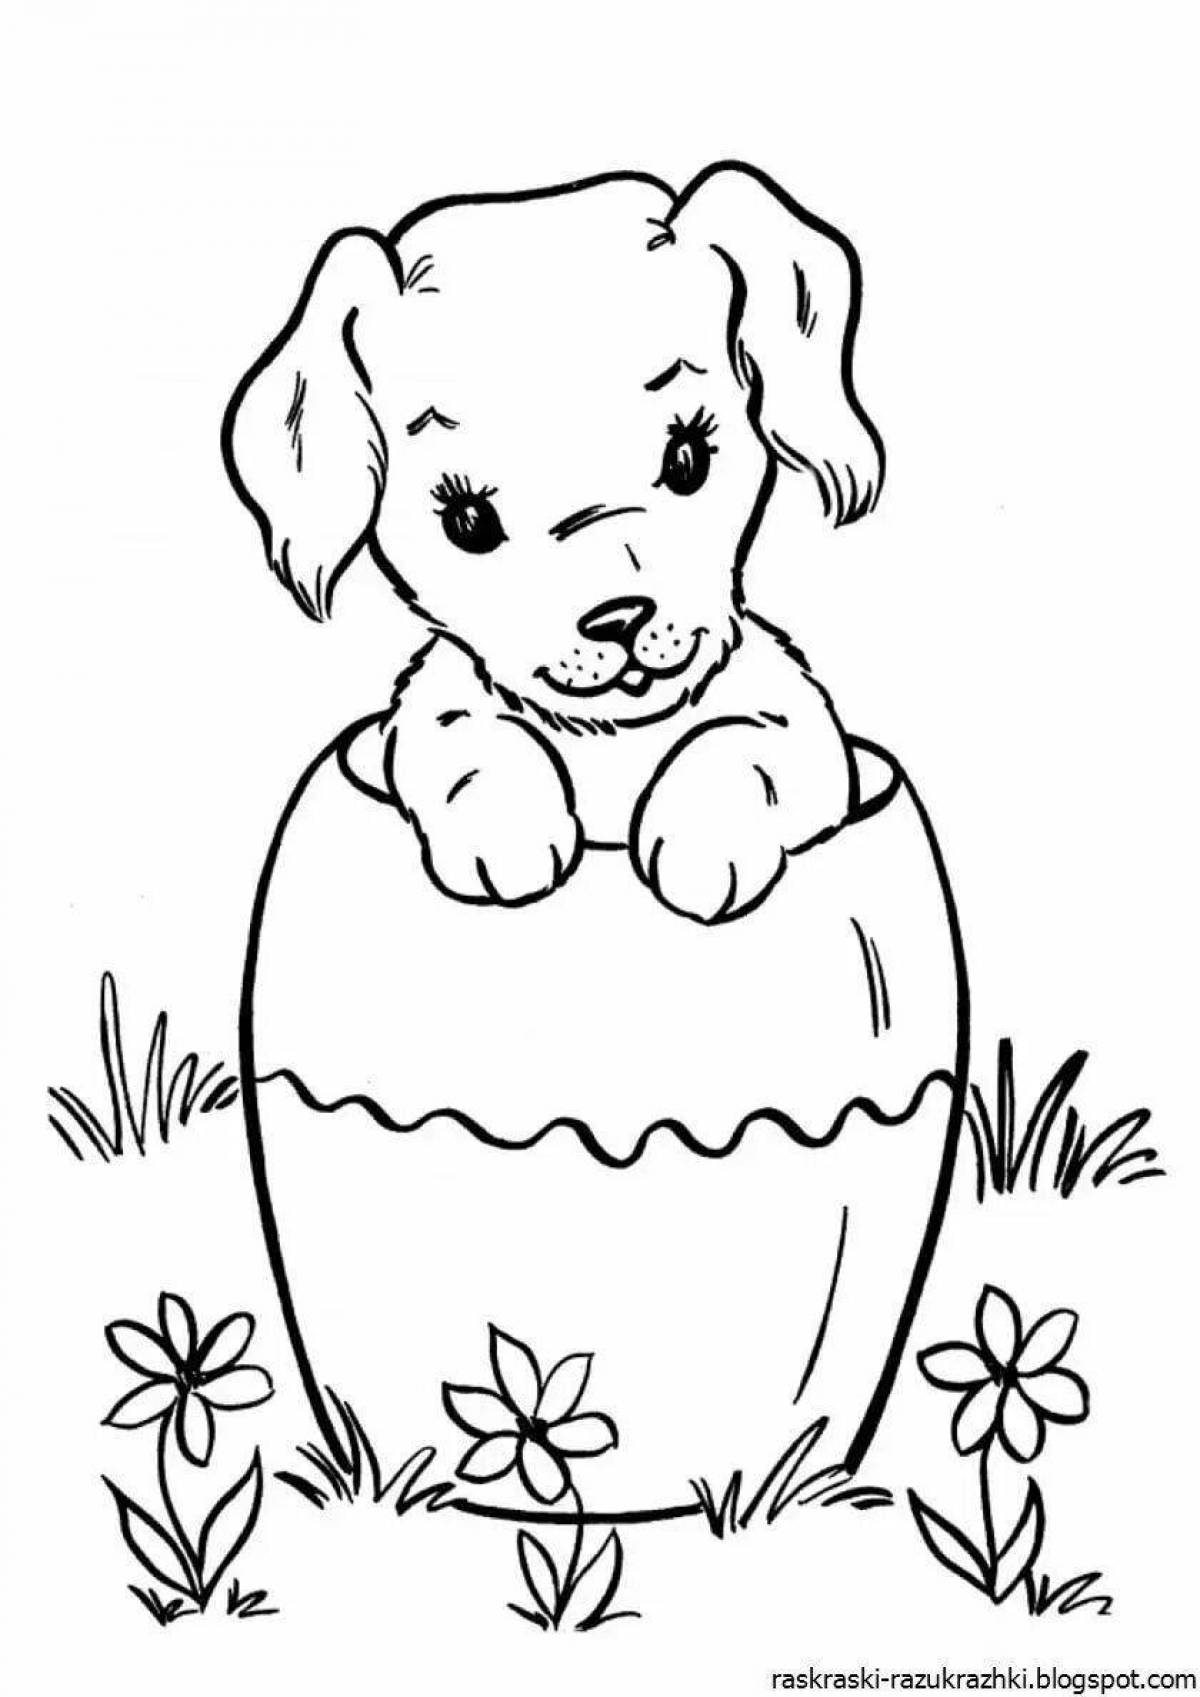 Glowing dog coloring page for girls